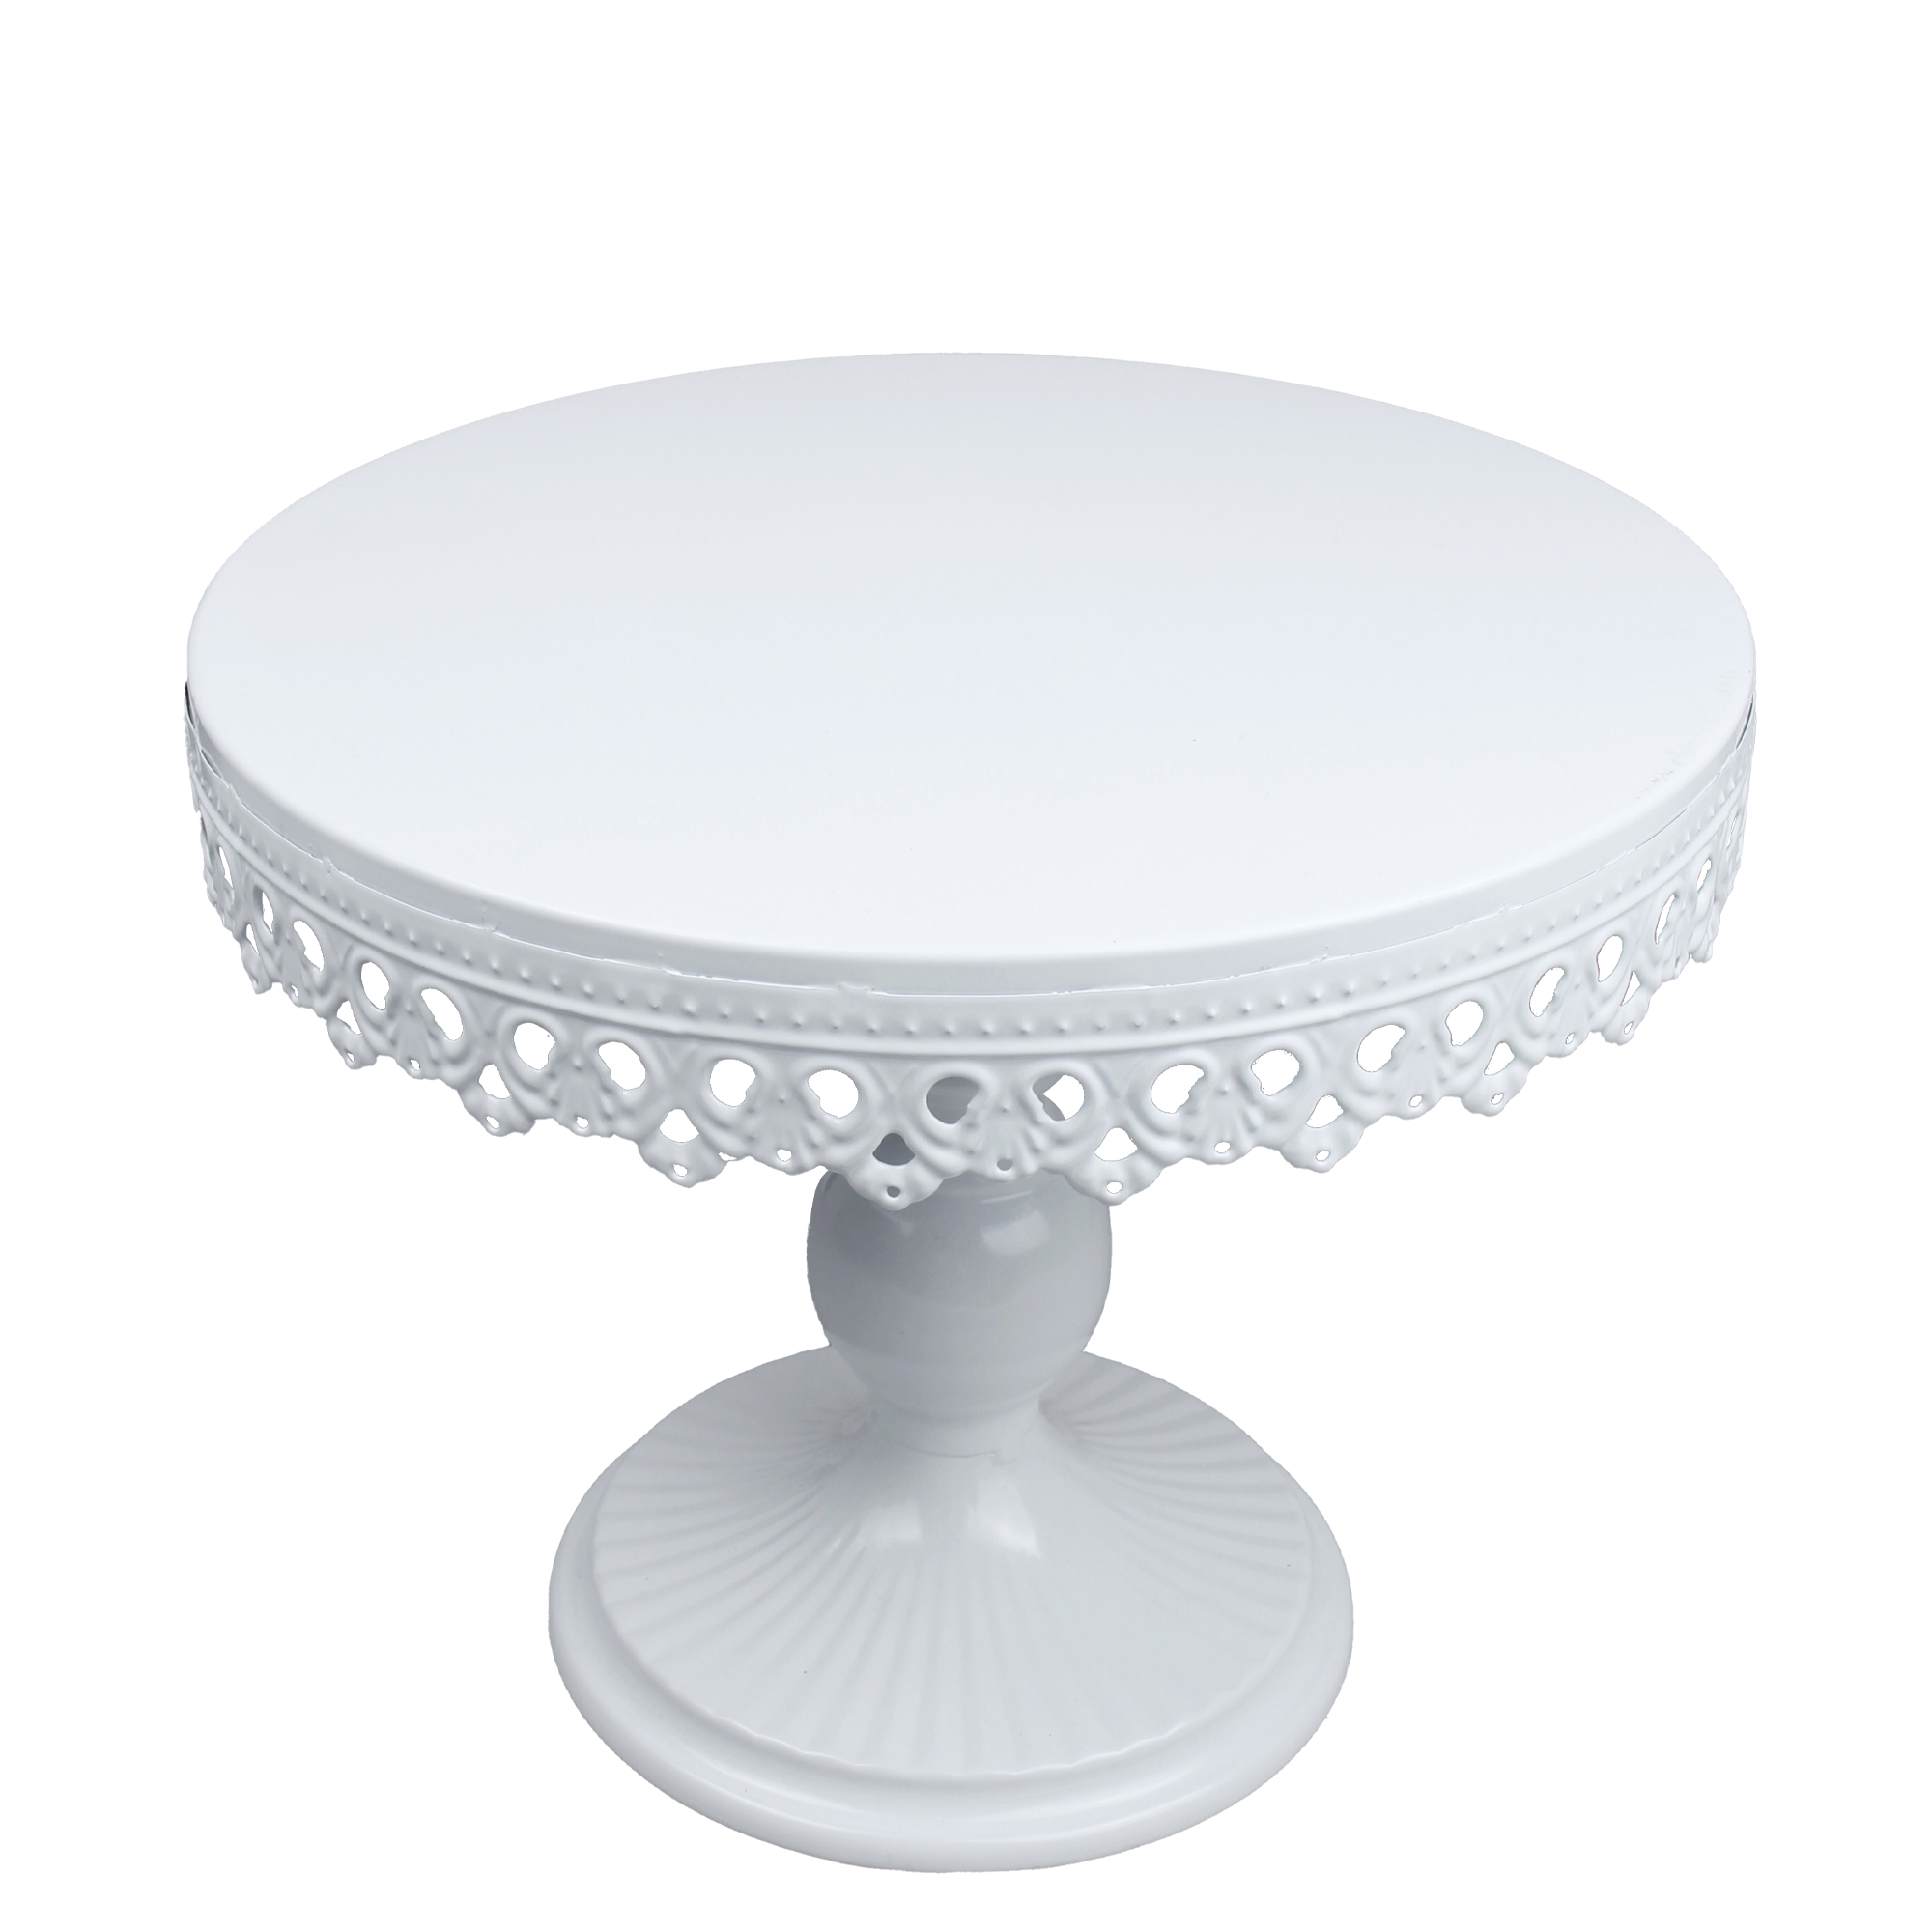 HB0989G 10"Metal Classical Cake/Cupcake Stand in white color